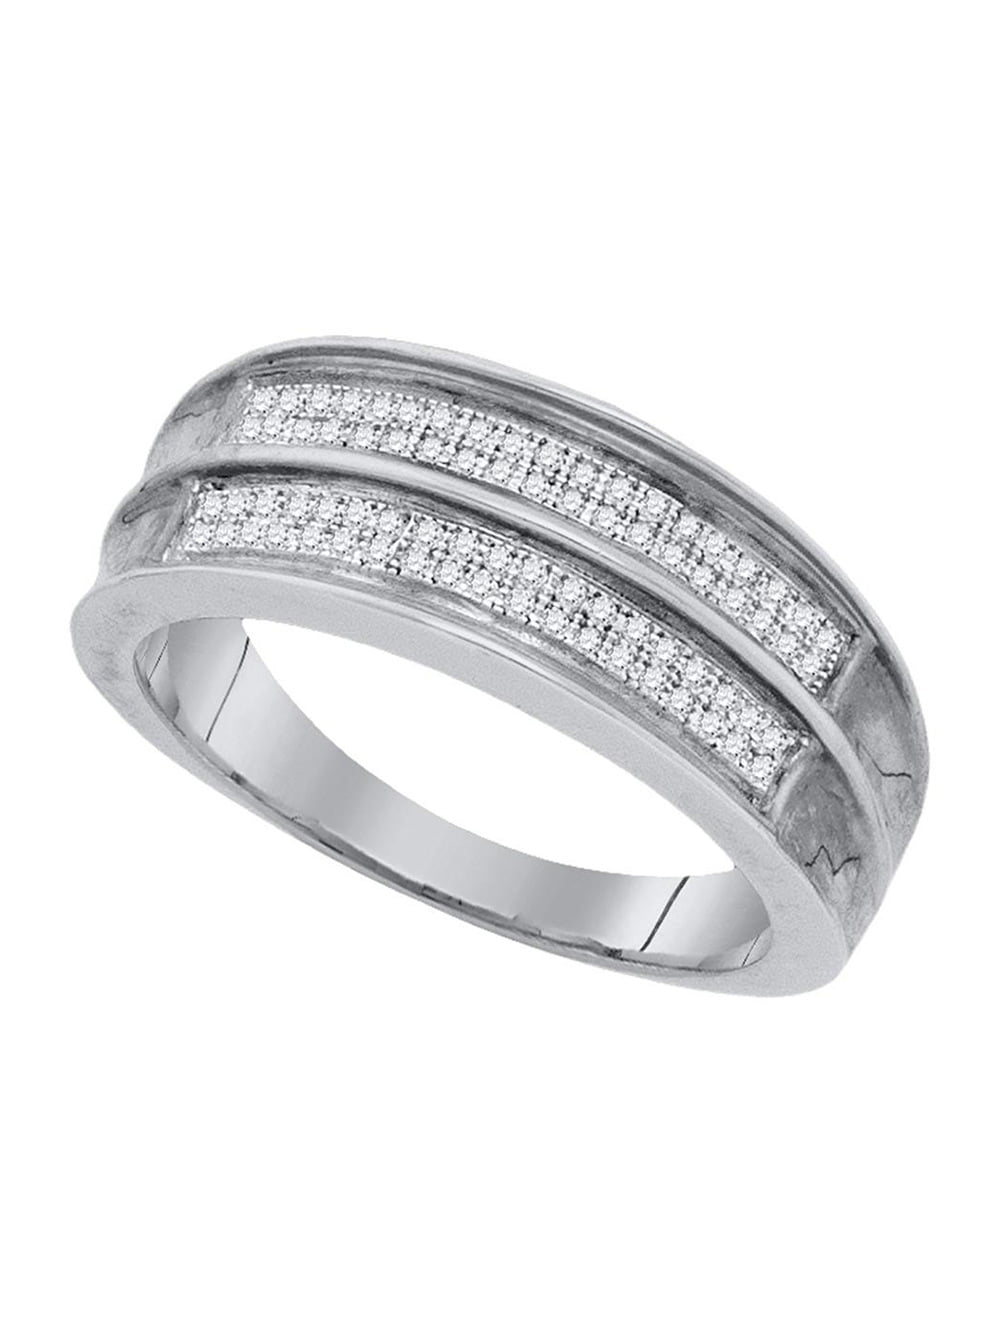 6mm Round Stone Men Solid Silver Ring Cross Band Size Selectable 